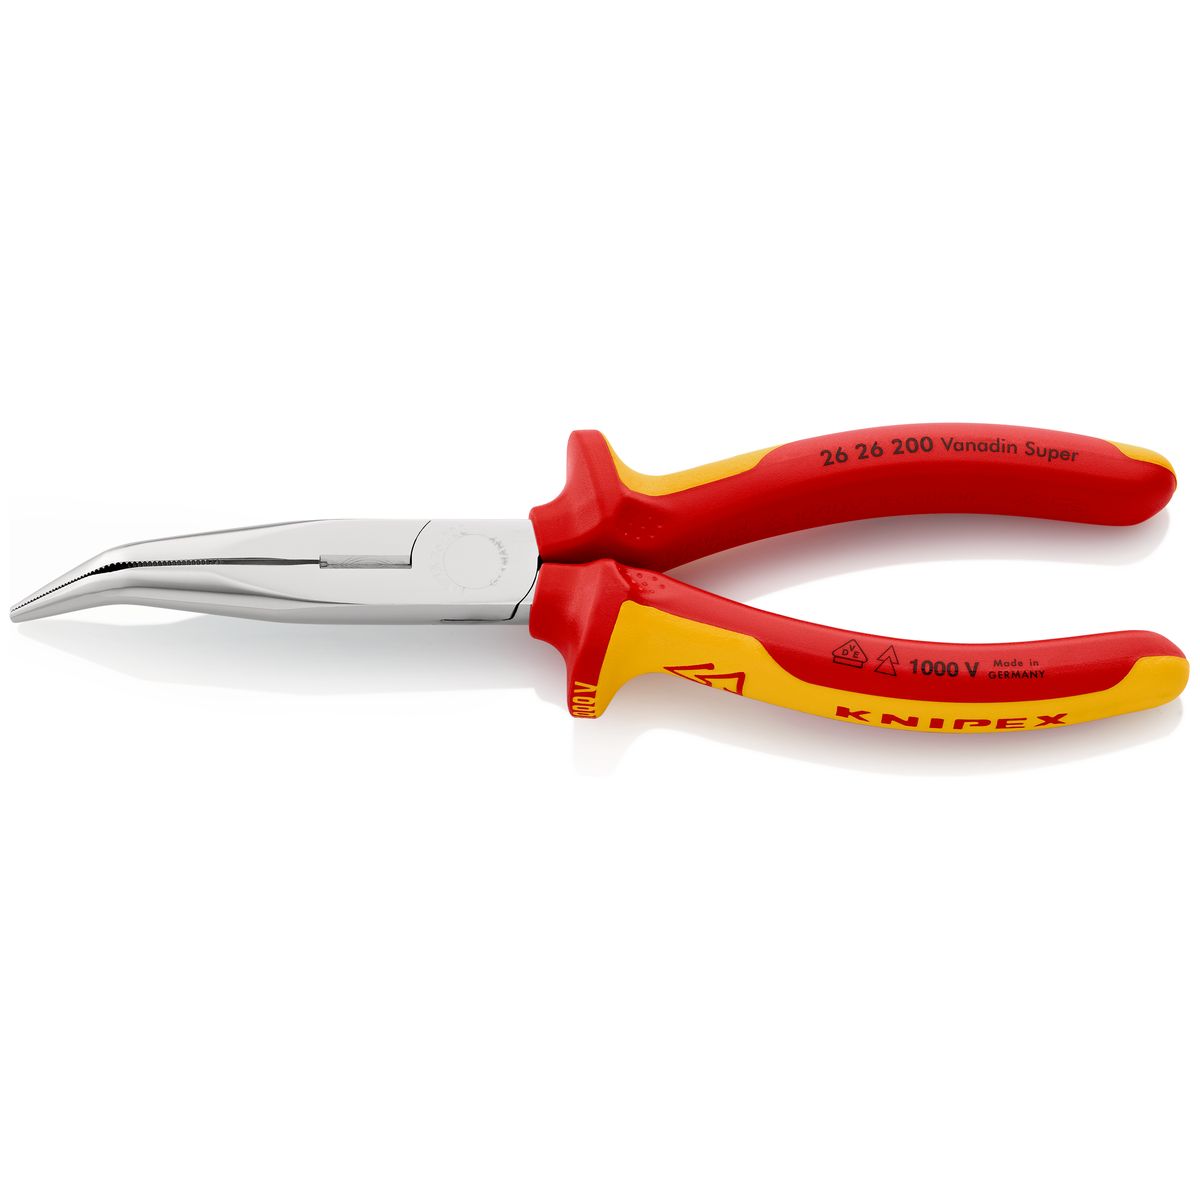 SNIPE NOSE SIDE CUTTING PLIERS 2626200 Knipex